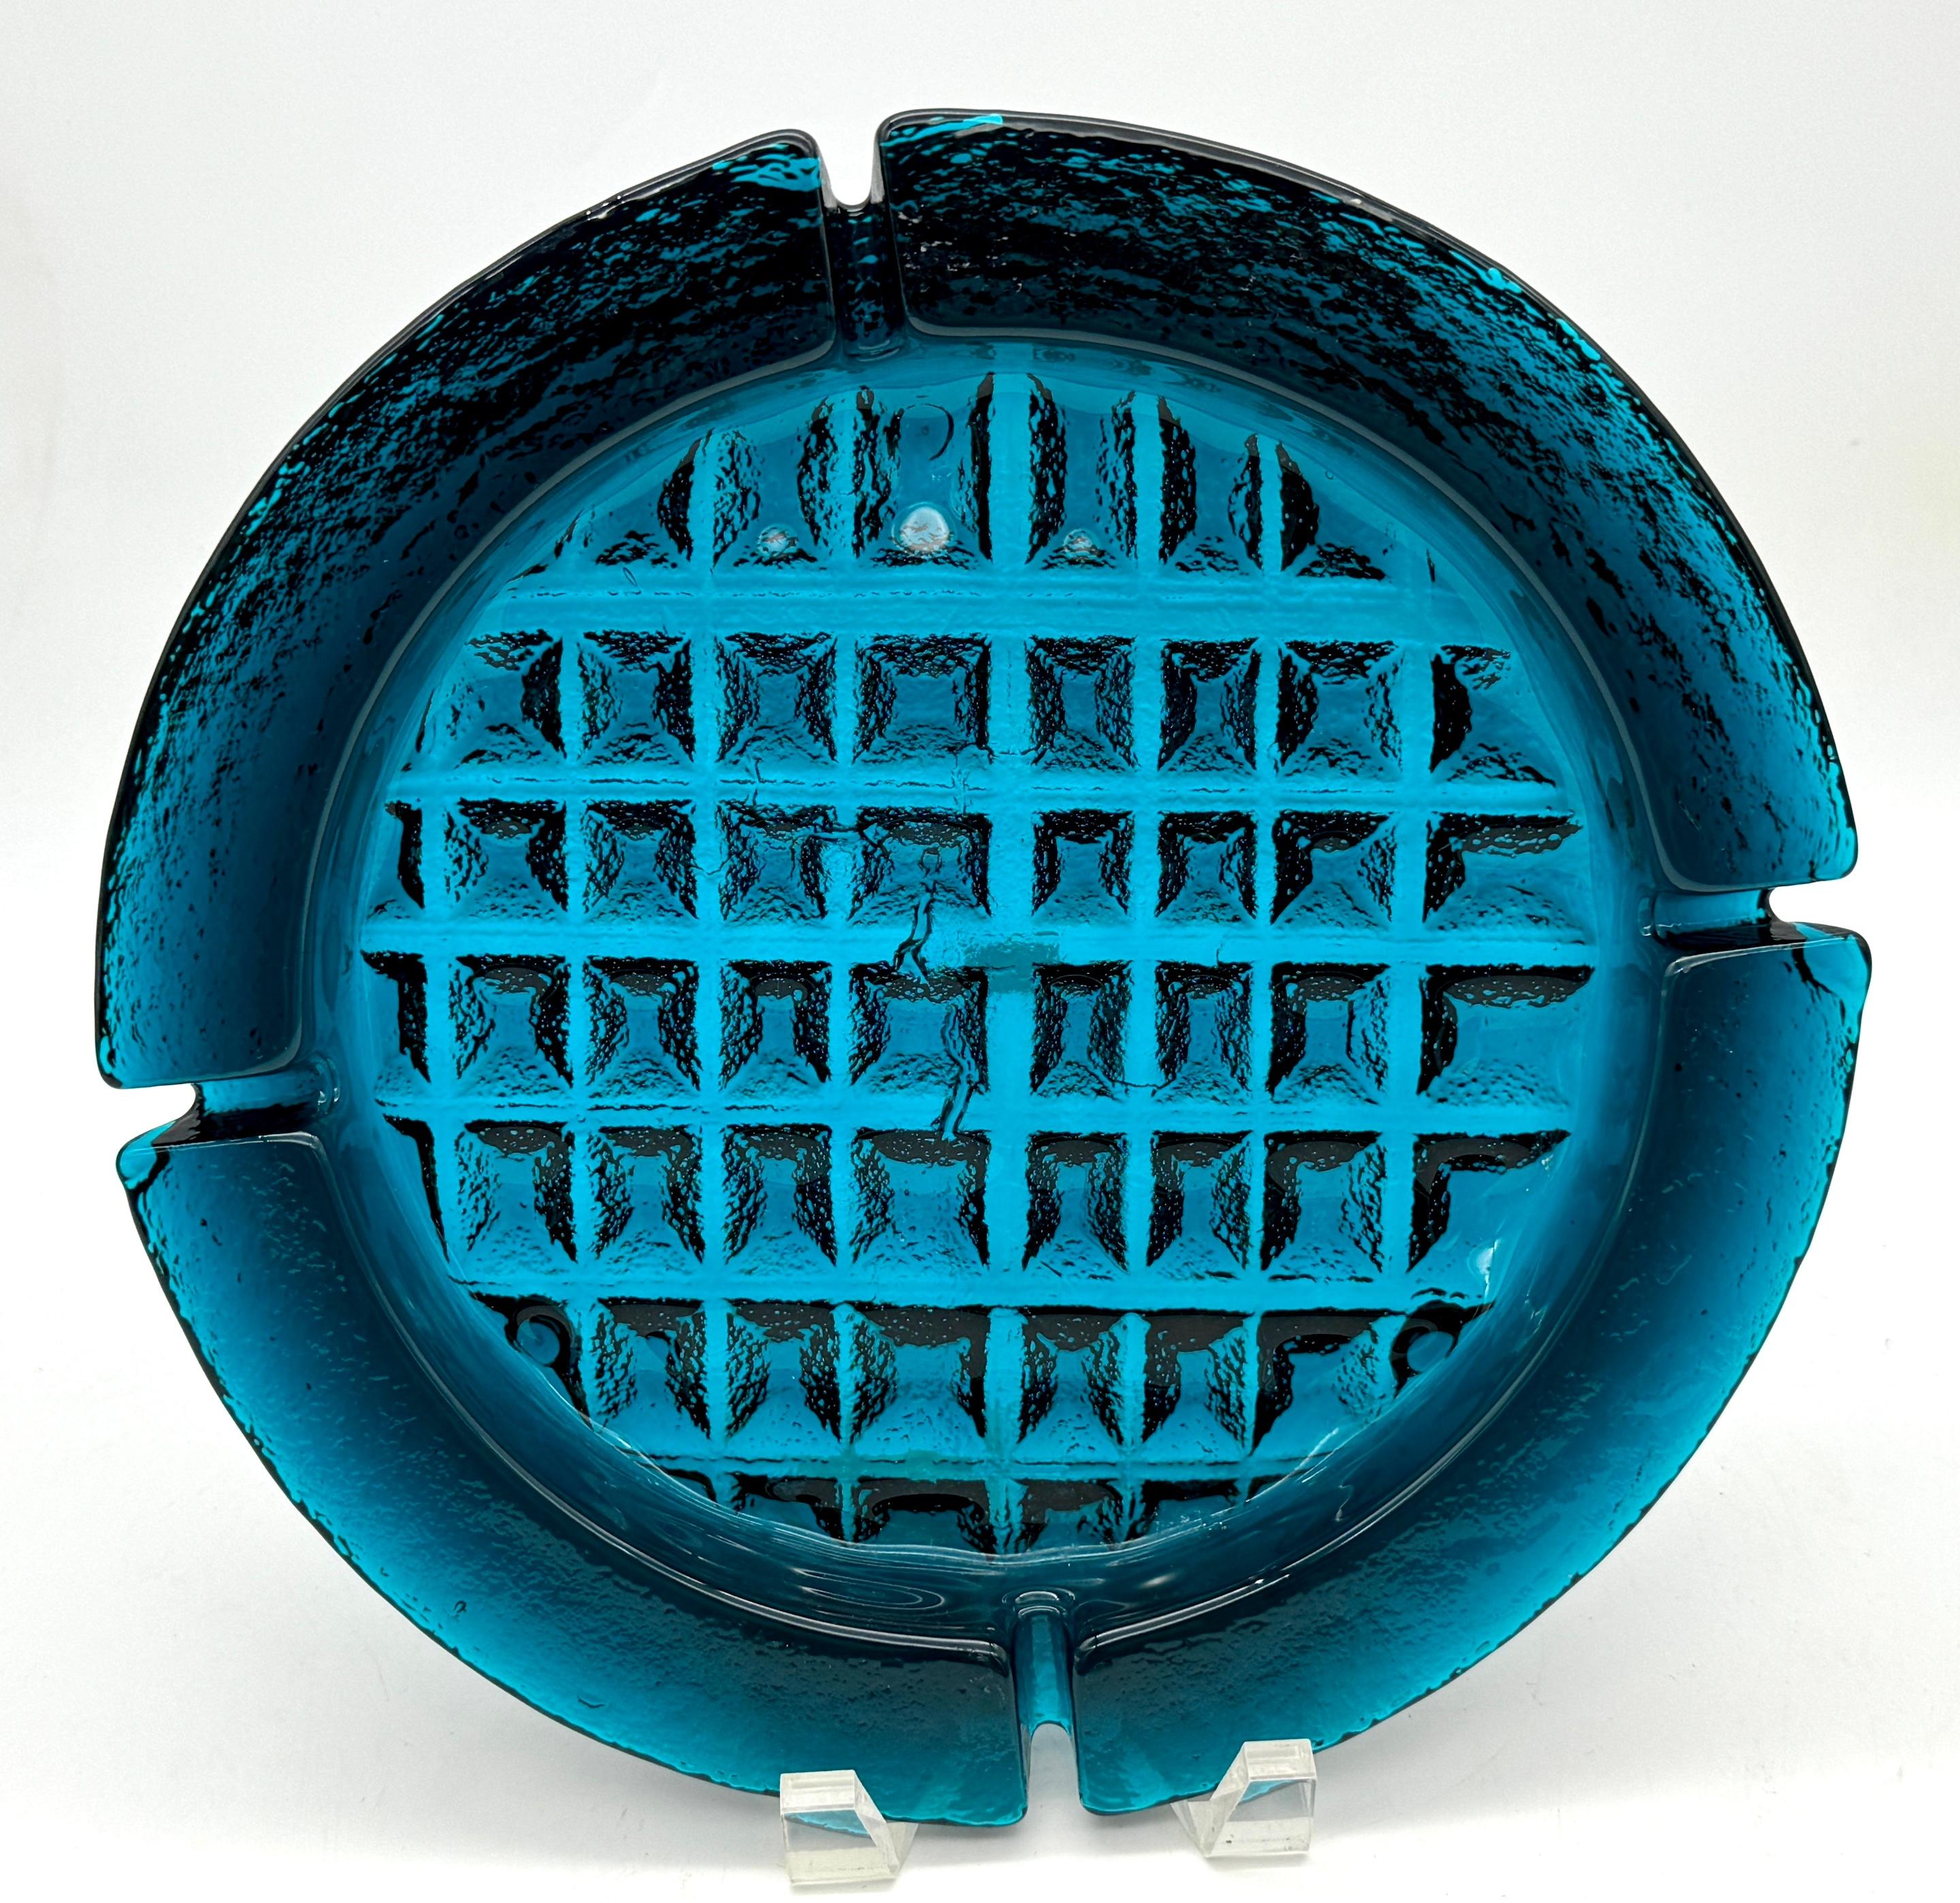 Massive 1970s Blenko 'Caribbean Blue' Brutalist Ashtray 
USA, circa 1970s

Transport yourself to the vibrant era of the 1970s with this striking piece of Blenko craftsmanship: a massive 1970s Blenko 'Caribbean Blue' Ashtray. This iconic ashtray